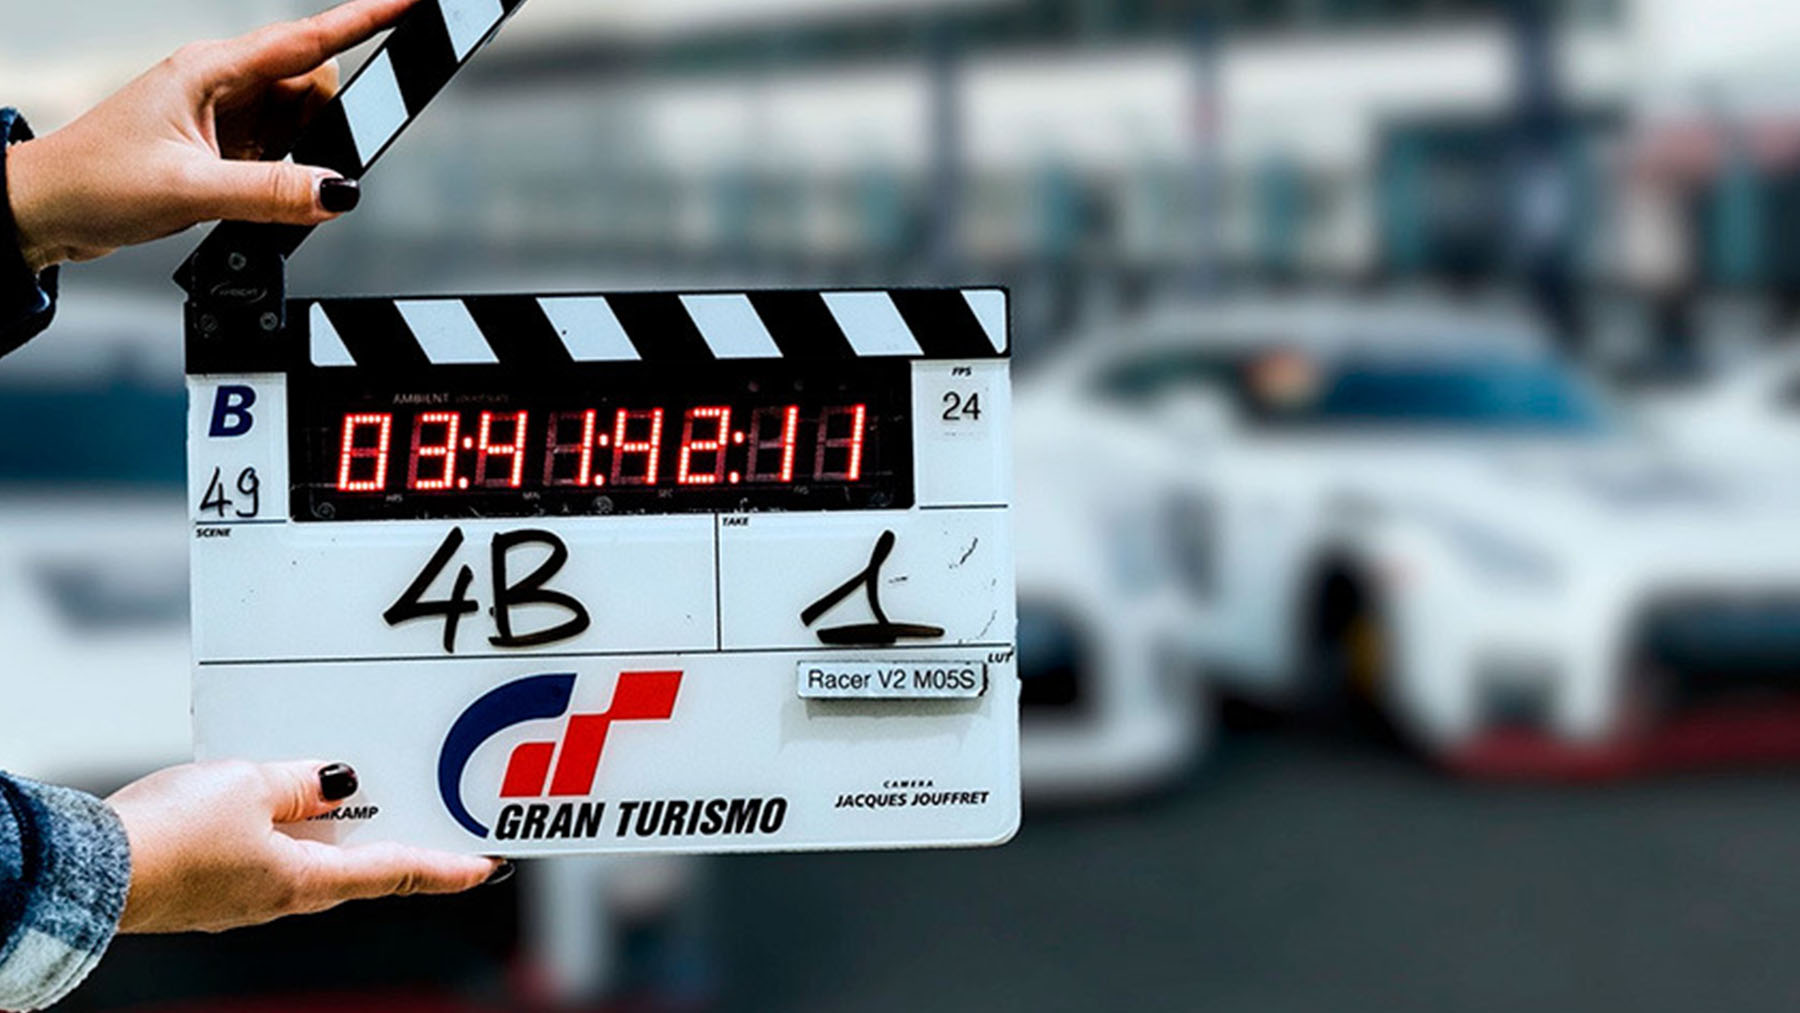 ‘Gran Turismo’ (Sony Pictures)